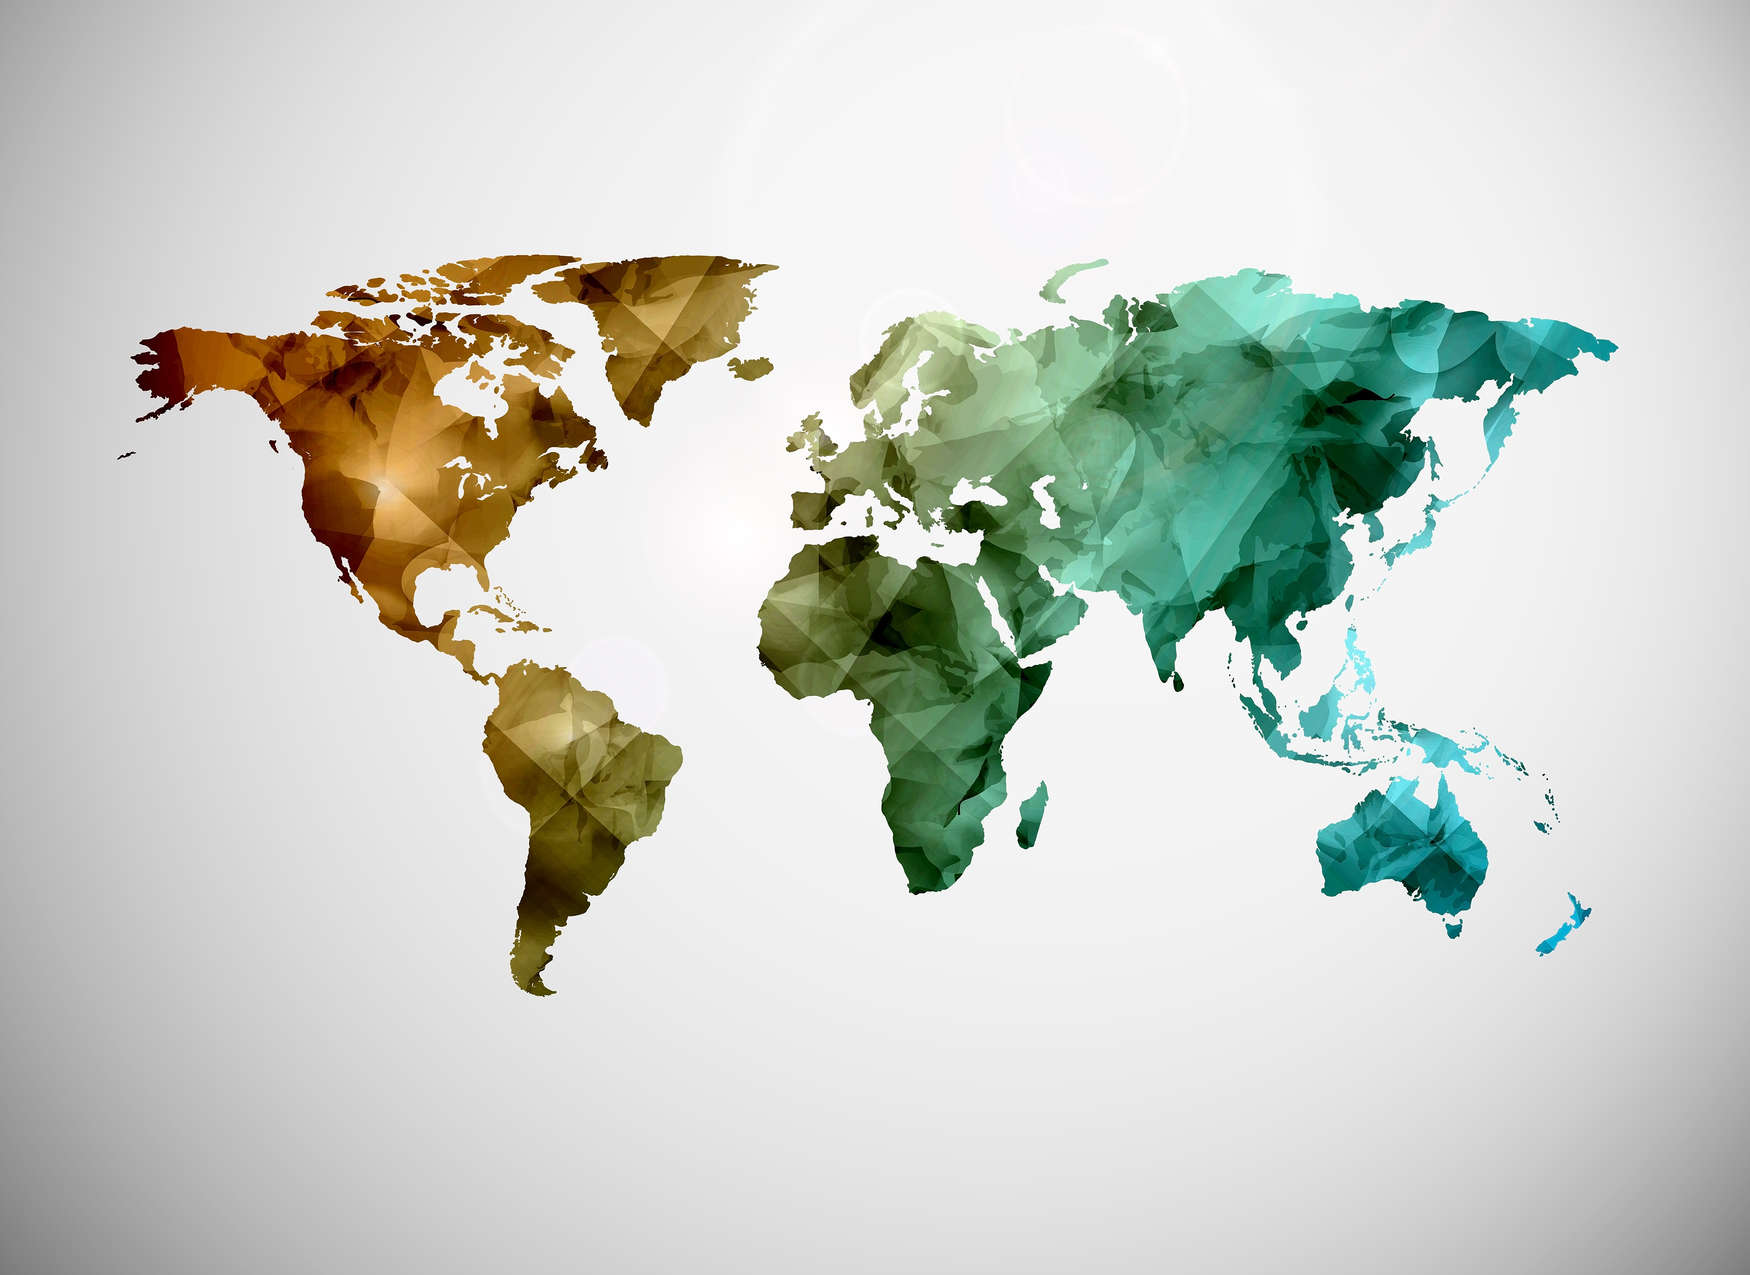             World map made of graphic elements - Coloured, White
        